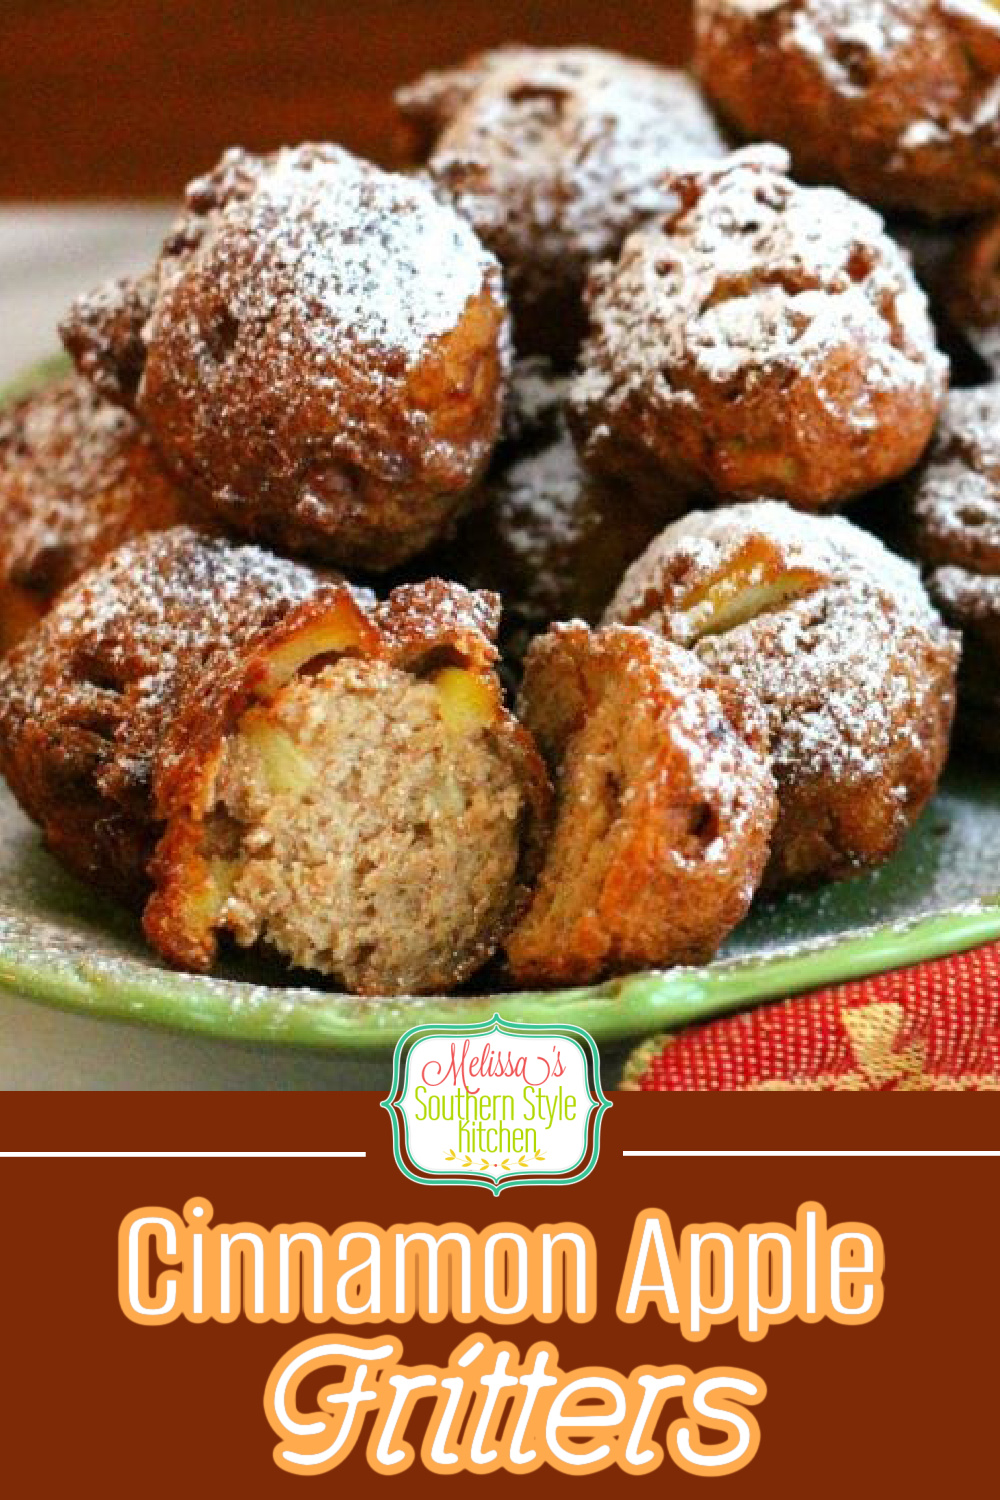 Treat the family to these golden Cinnamon apple Fritters dusted with powdered sugar for breakfast, brunch or dessert #applefritters #appledesserts #apples #fritters @appledonuts #southernrecipes #brunch #desserts #dessertfoodrecipes